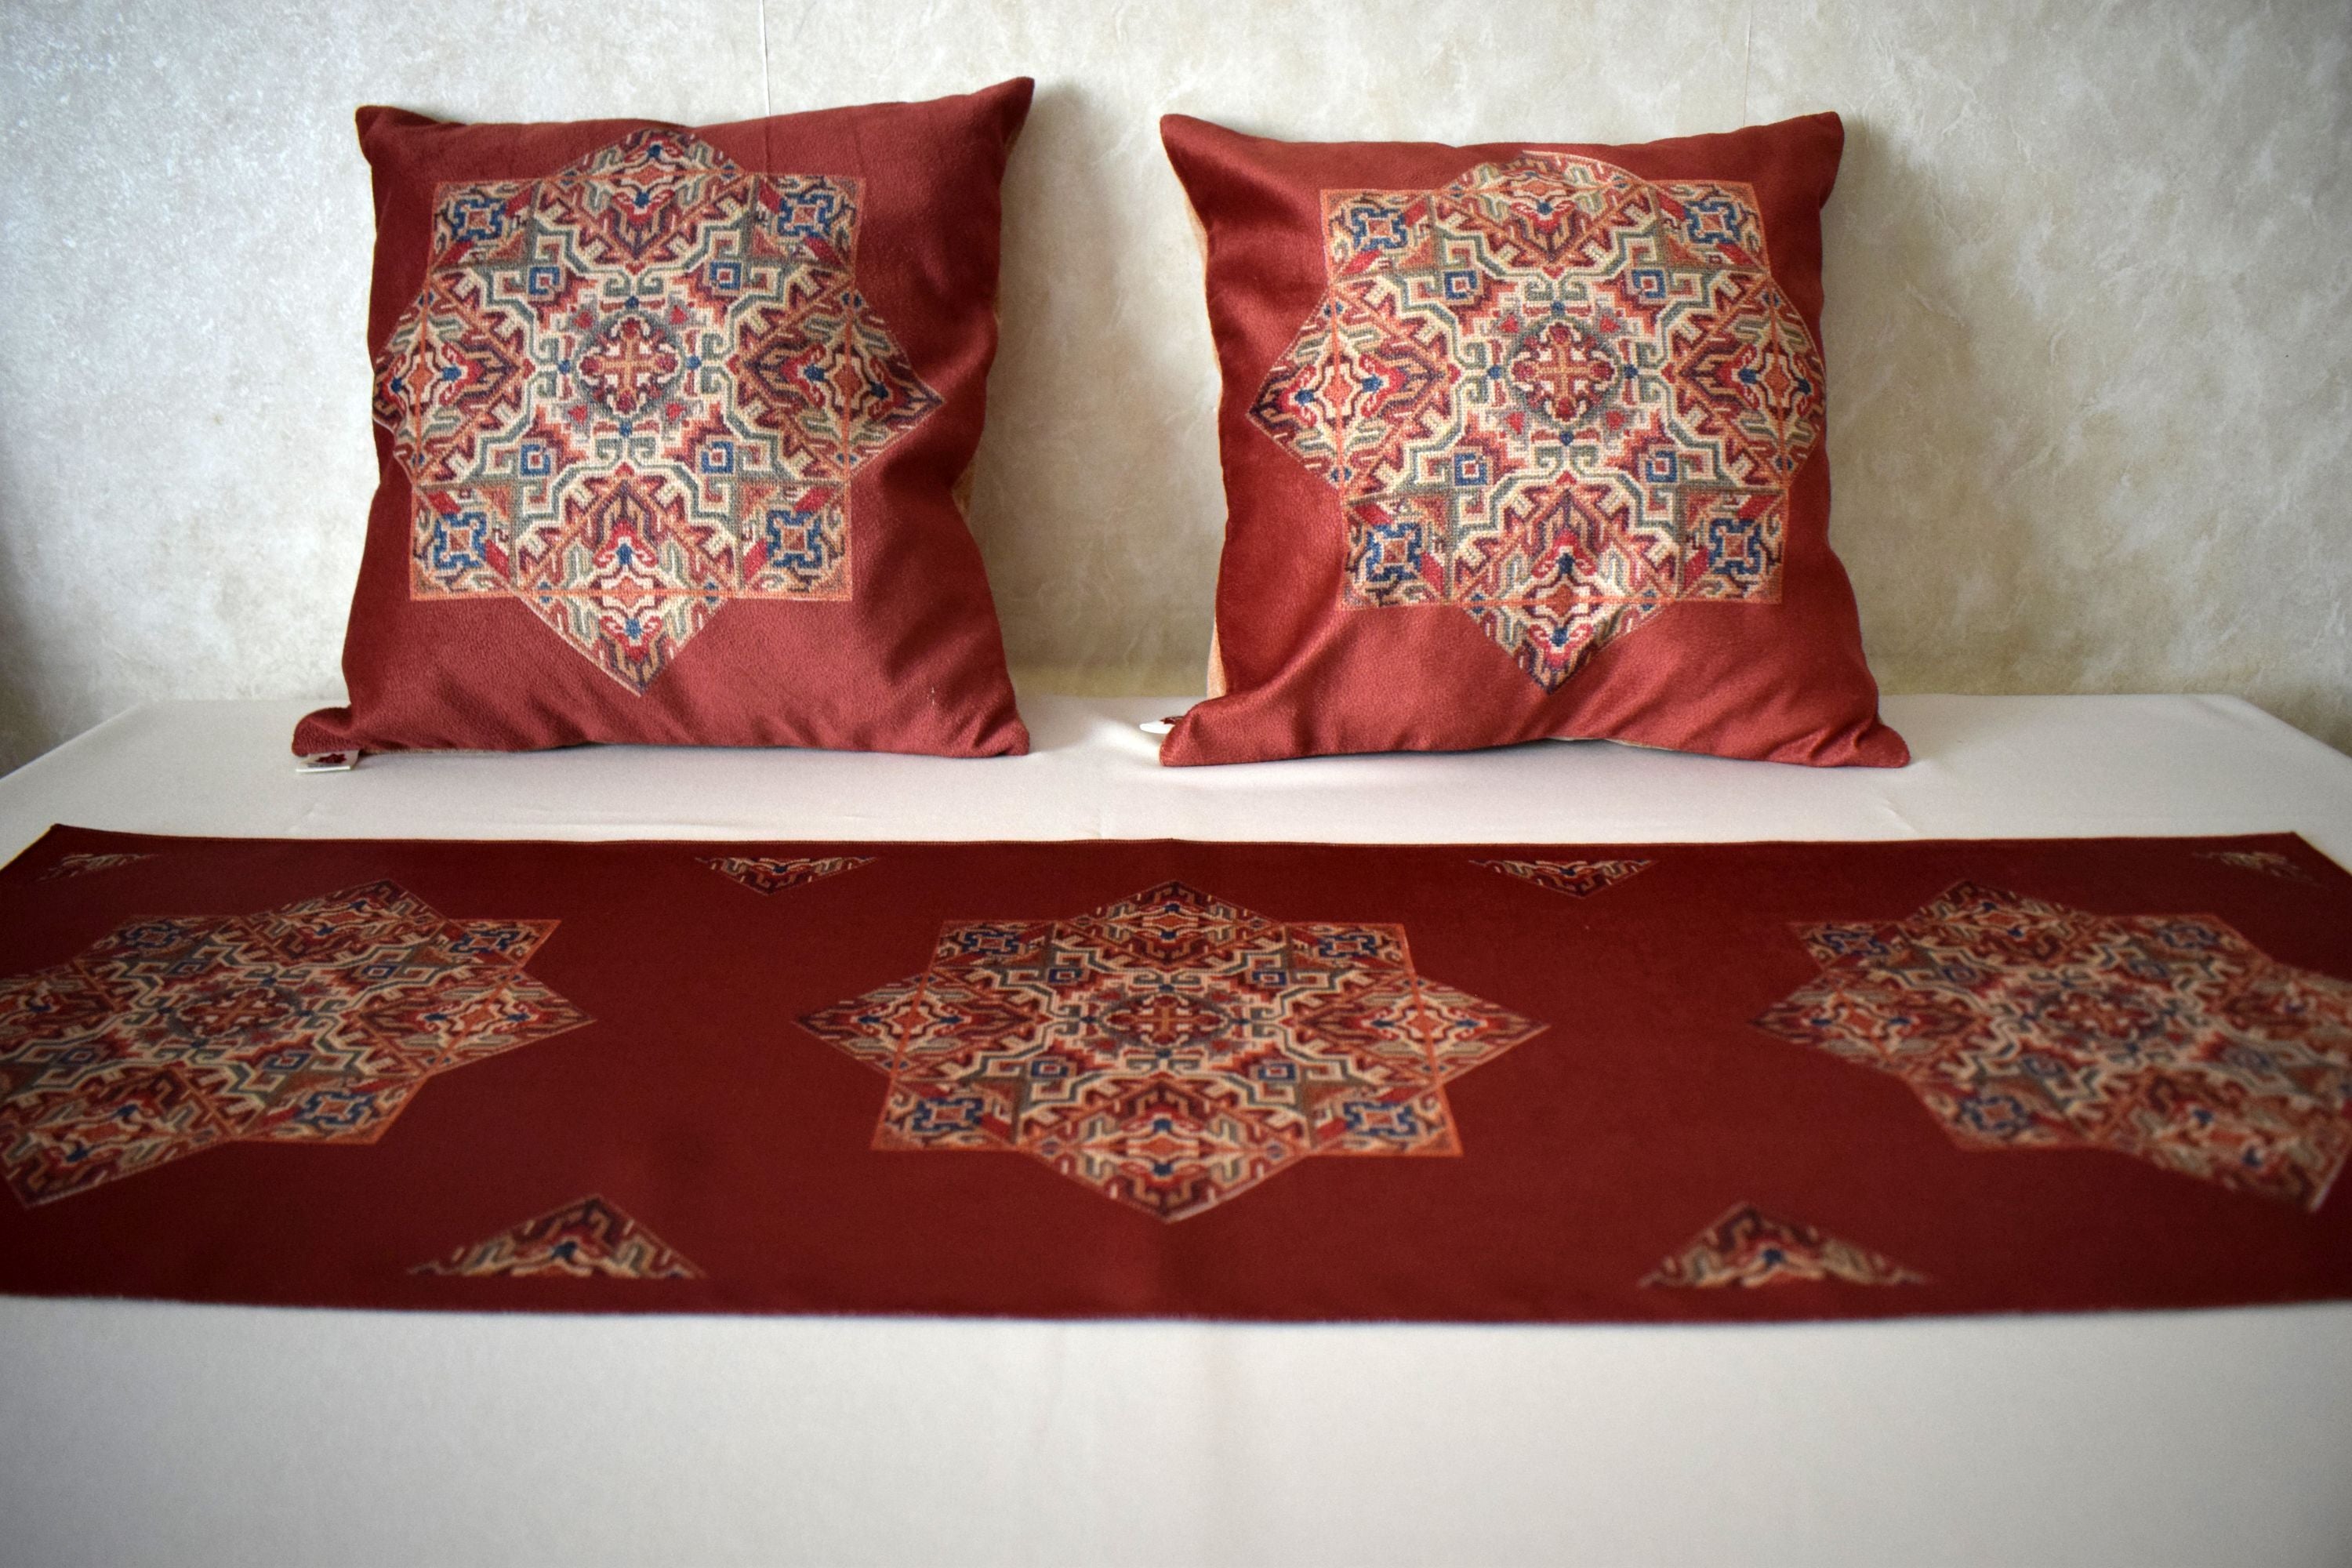 Tablecloth and Pillowcases with Armenian Ornaments